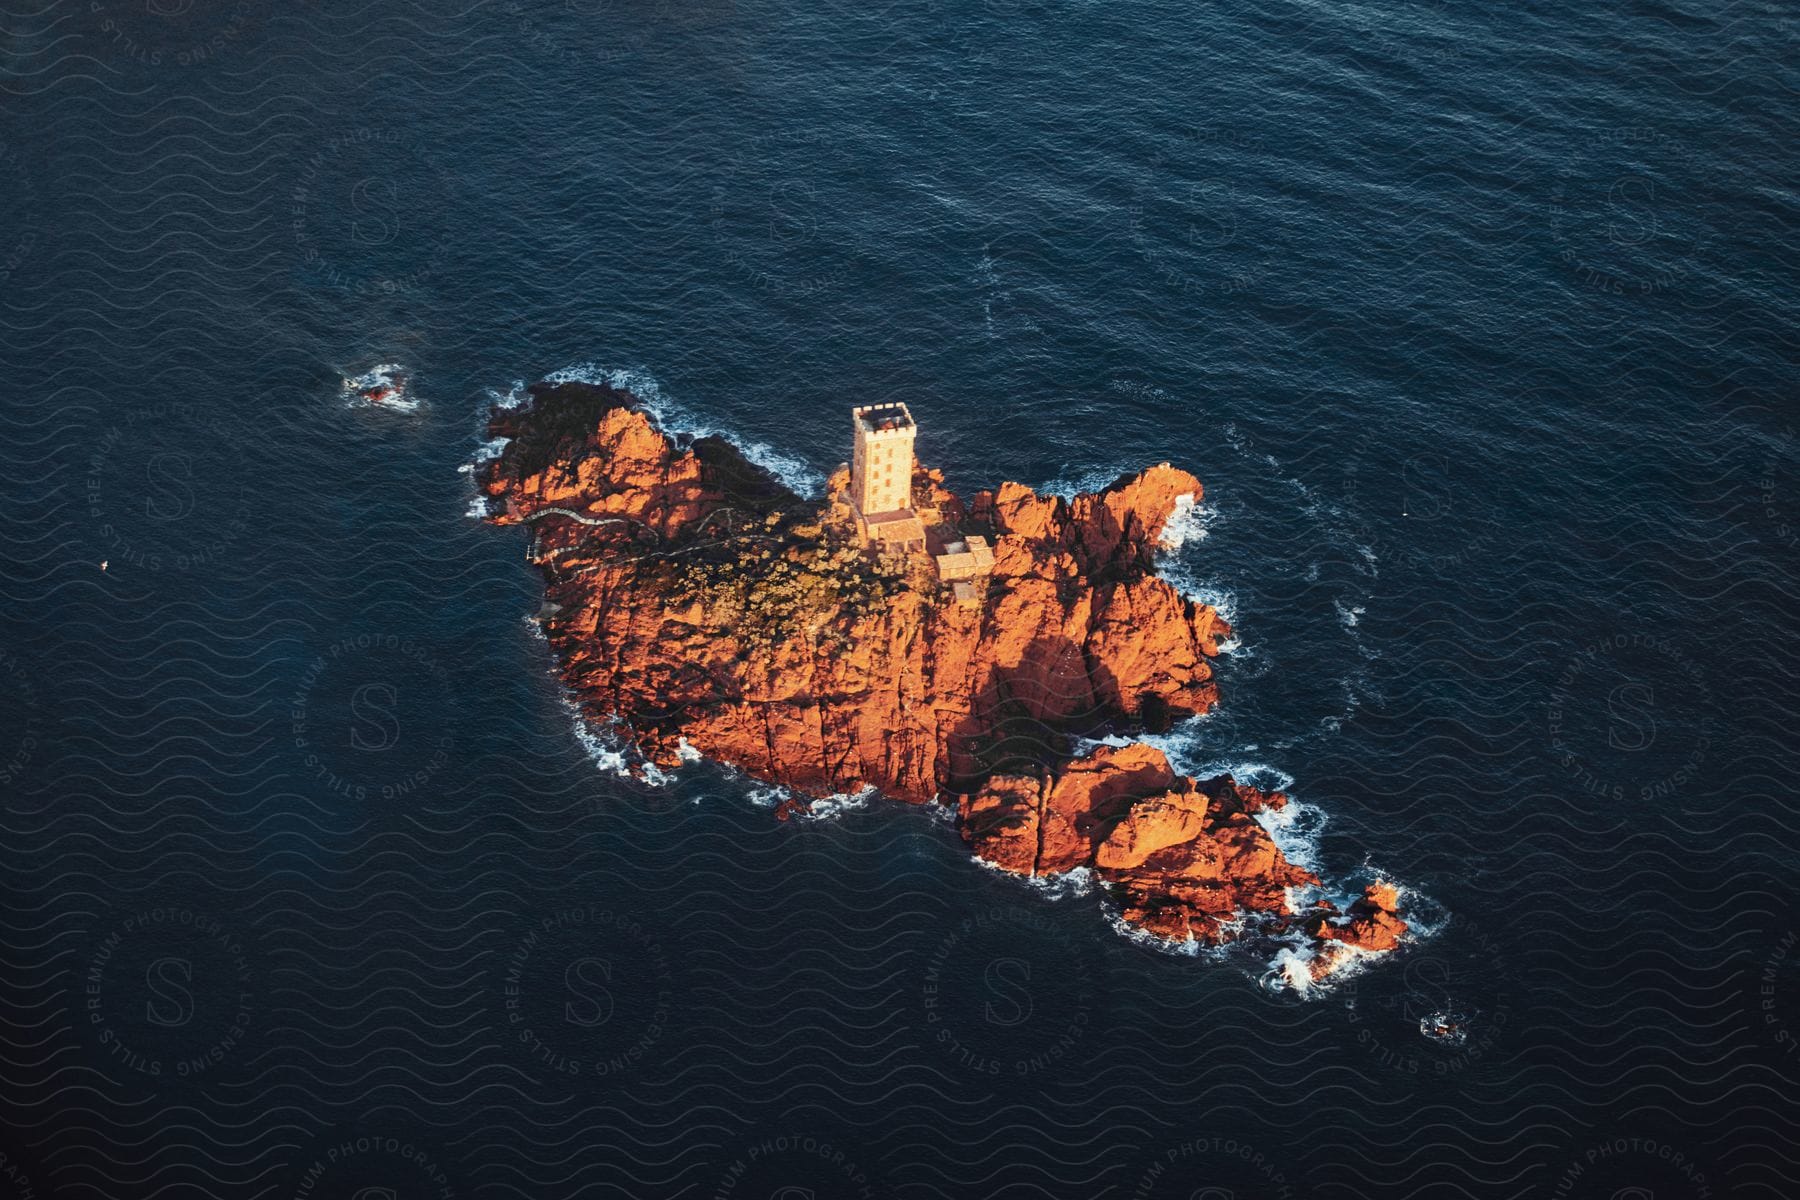 A watchtower on a small island is illuminated by the sun as waves crash onto the rocks along the coast